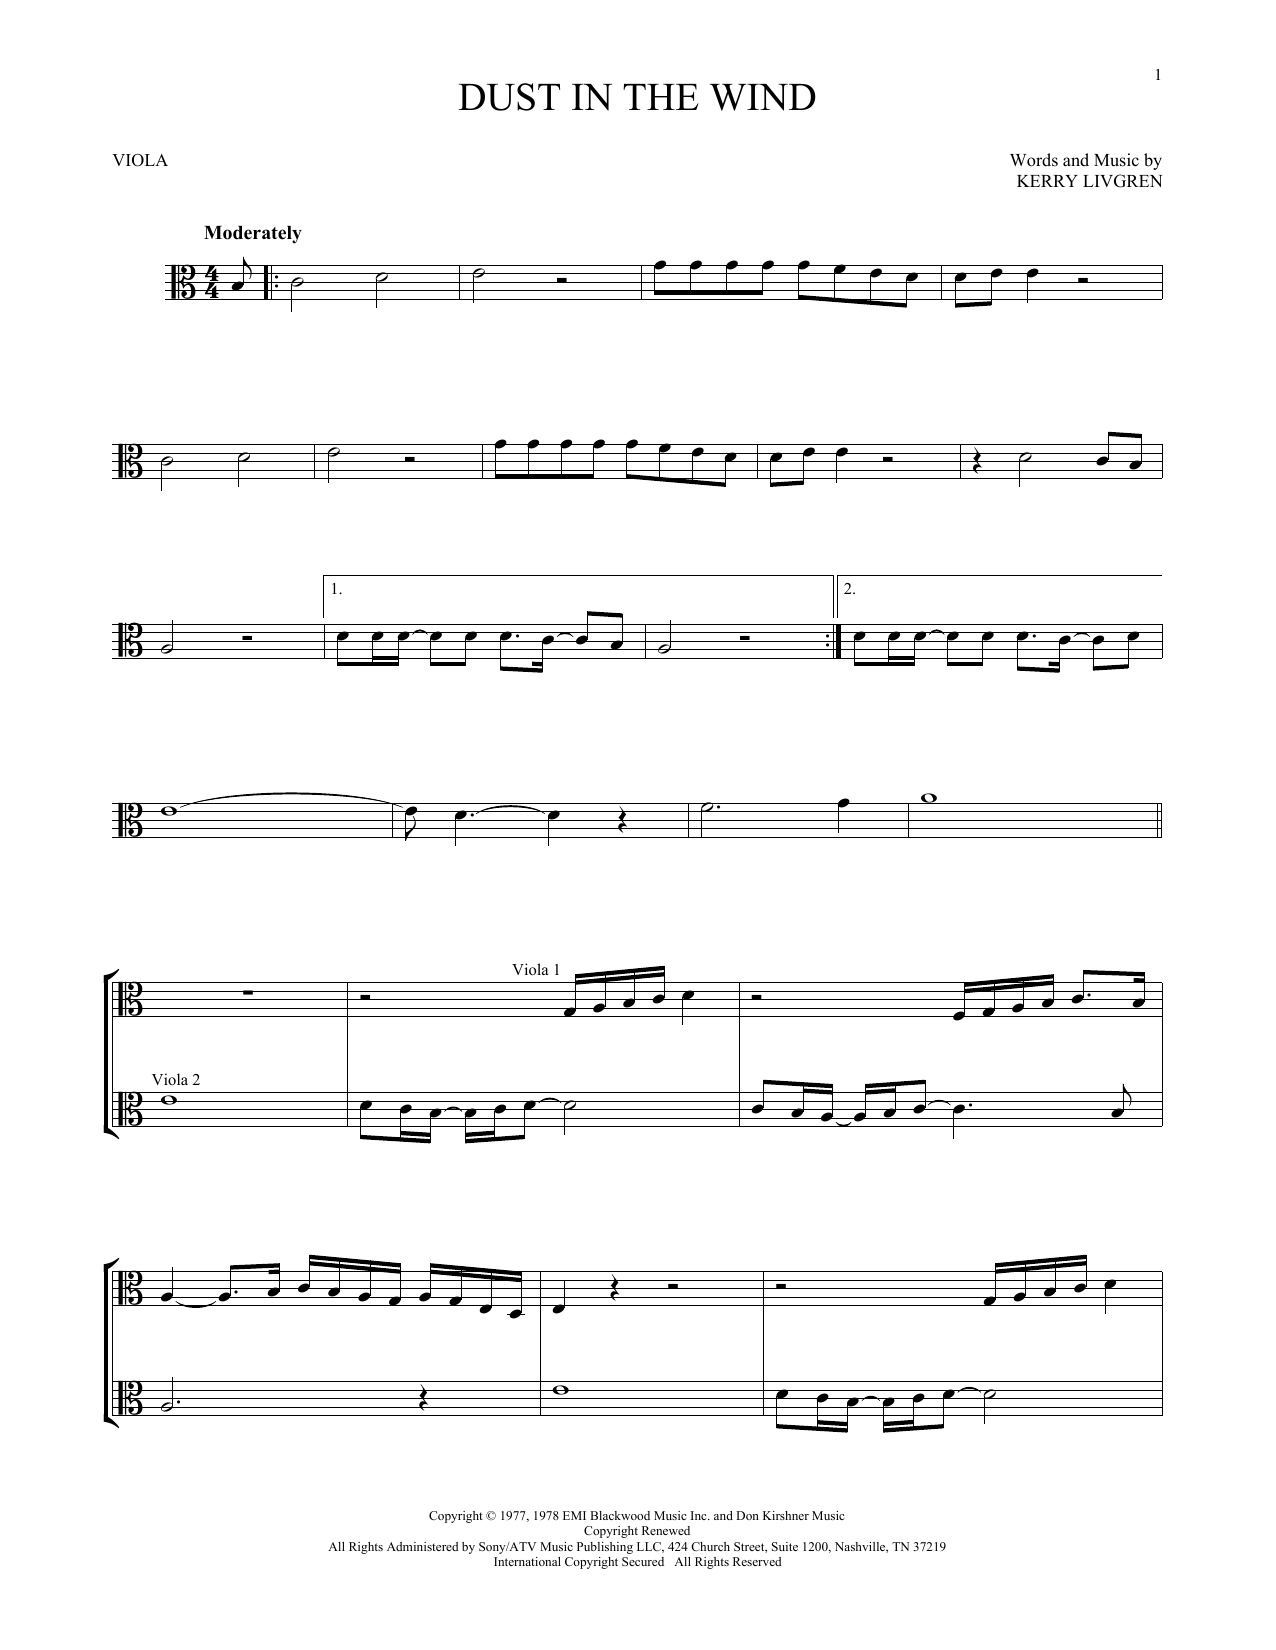 Download Kansas Dust In The Wind Sheet Music